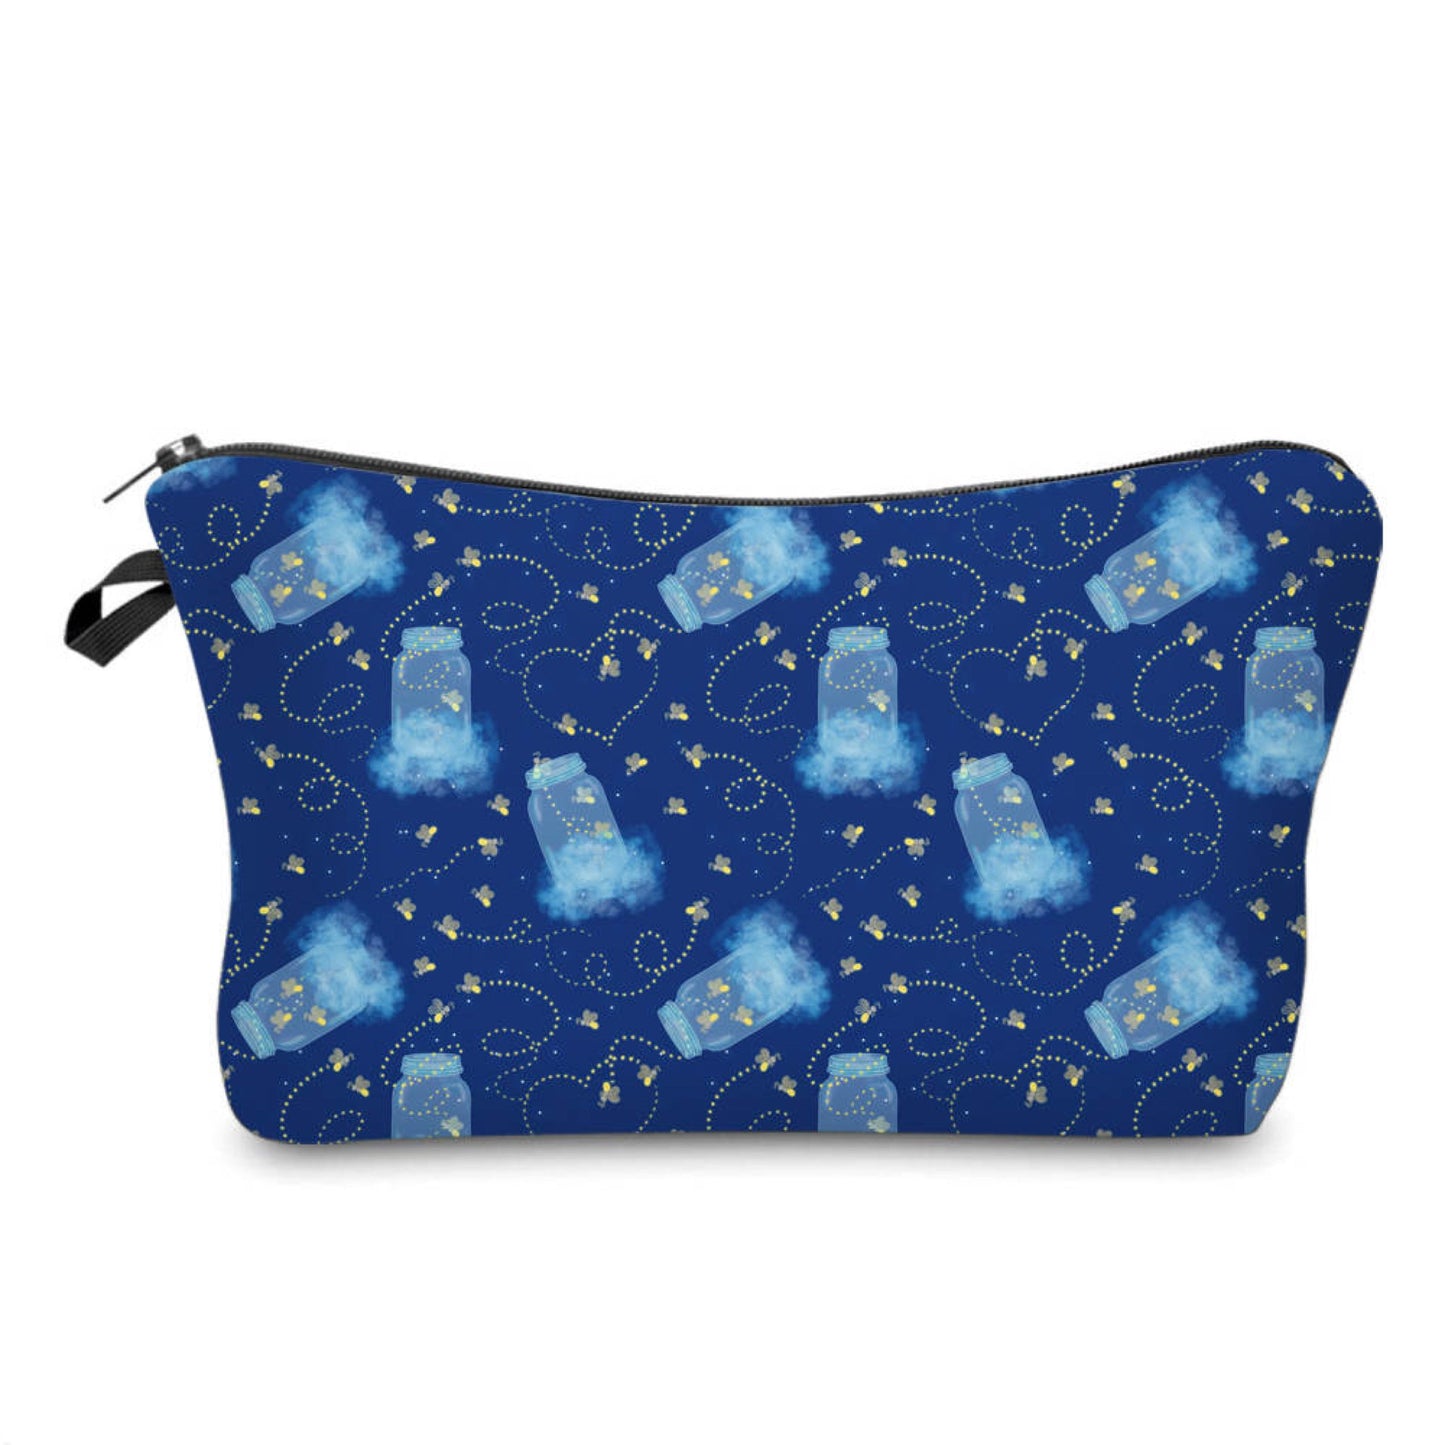 Firefly Blue - Water-Resistant Multi-Use Pouch